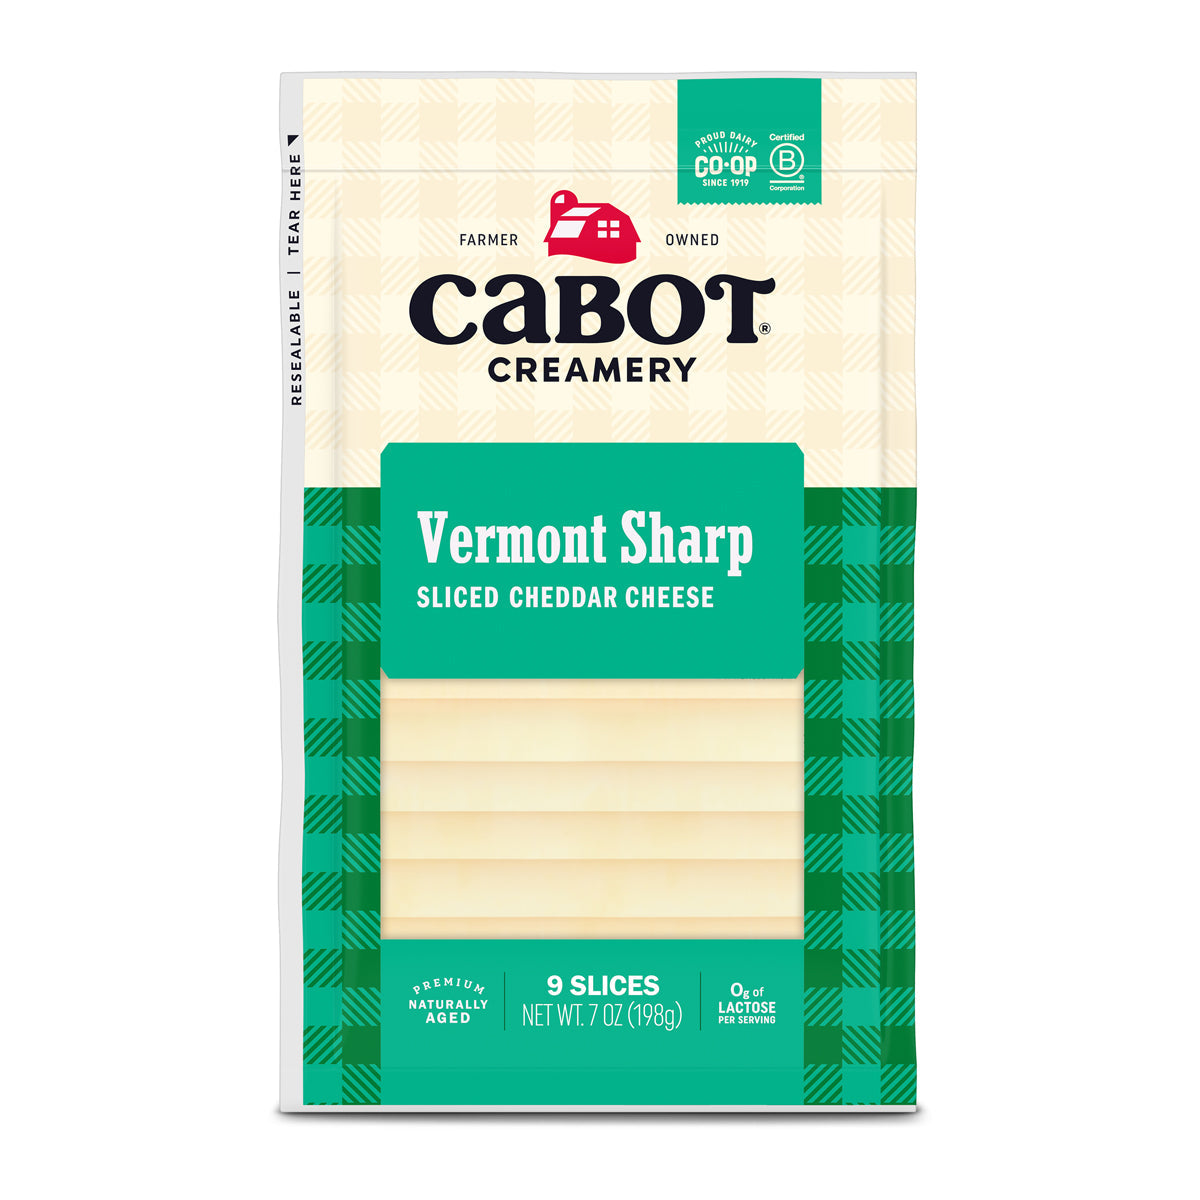 Cabot Creamery Seriously Sharp Cheddar Cheese 7oz Pack